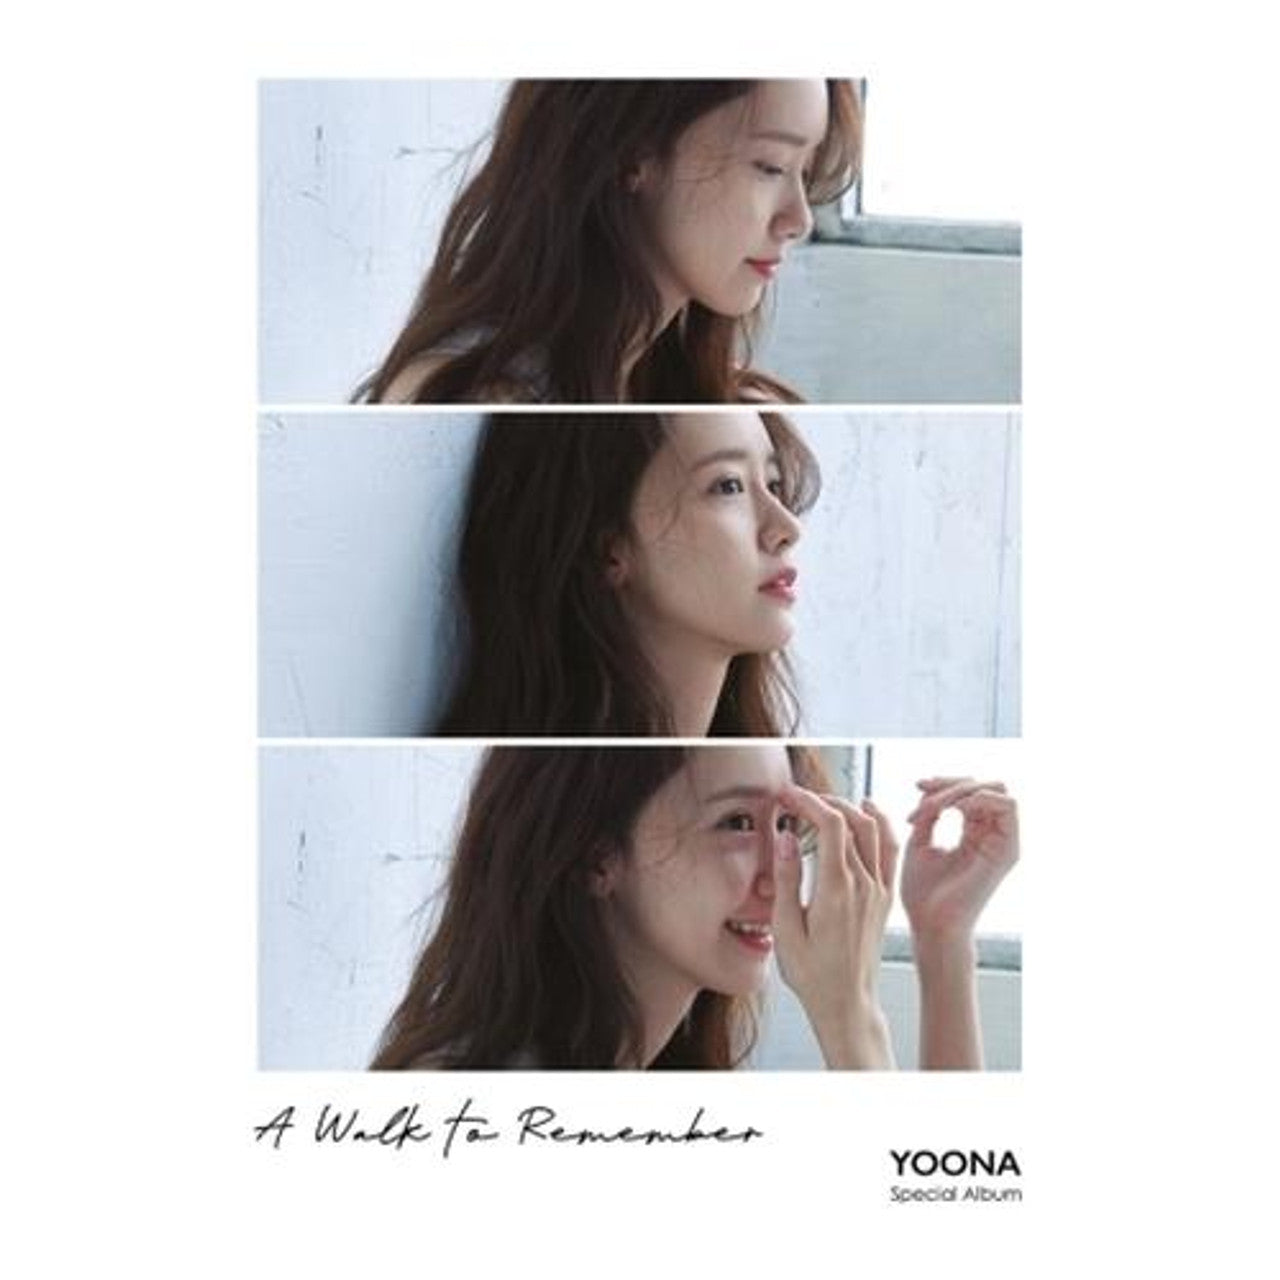 Yoona - A Walk To Remember